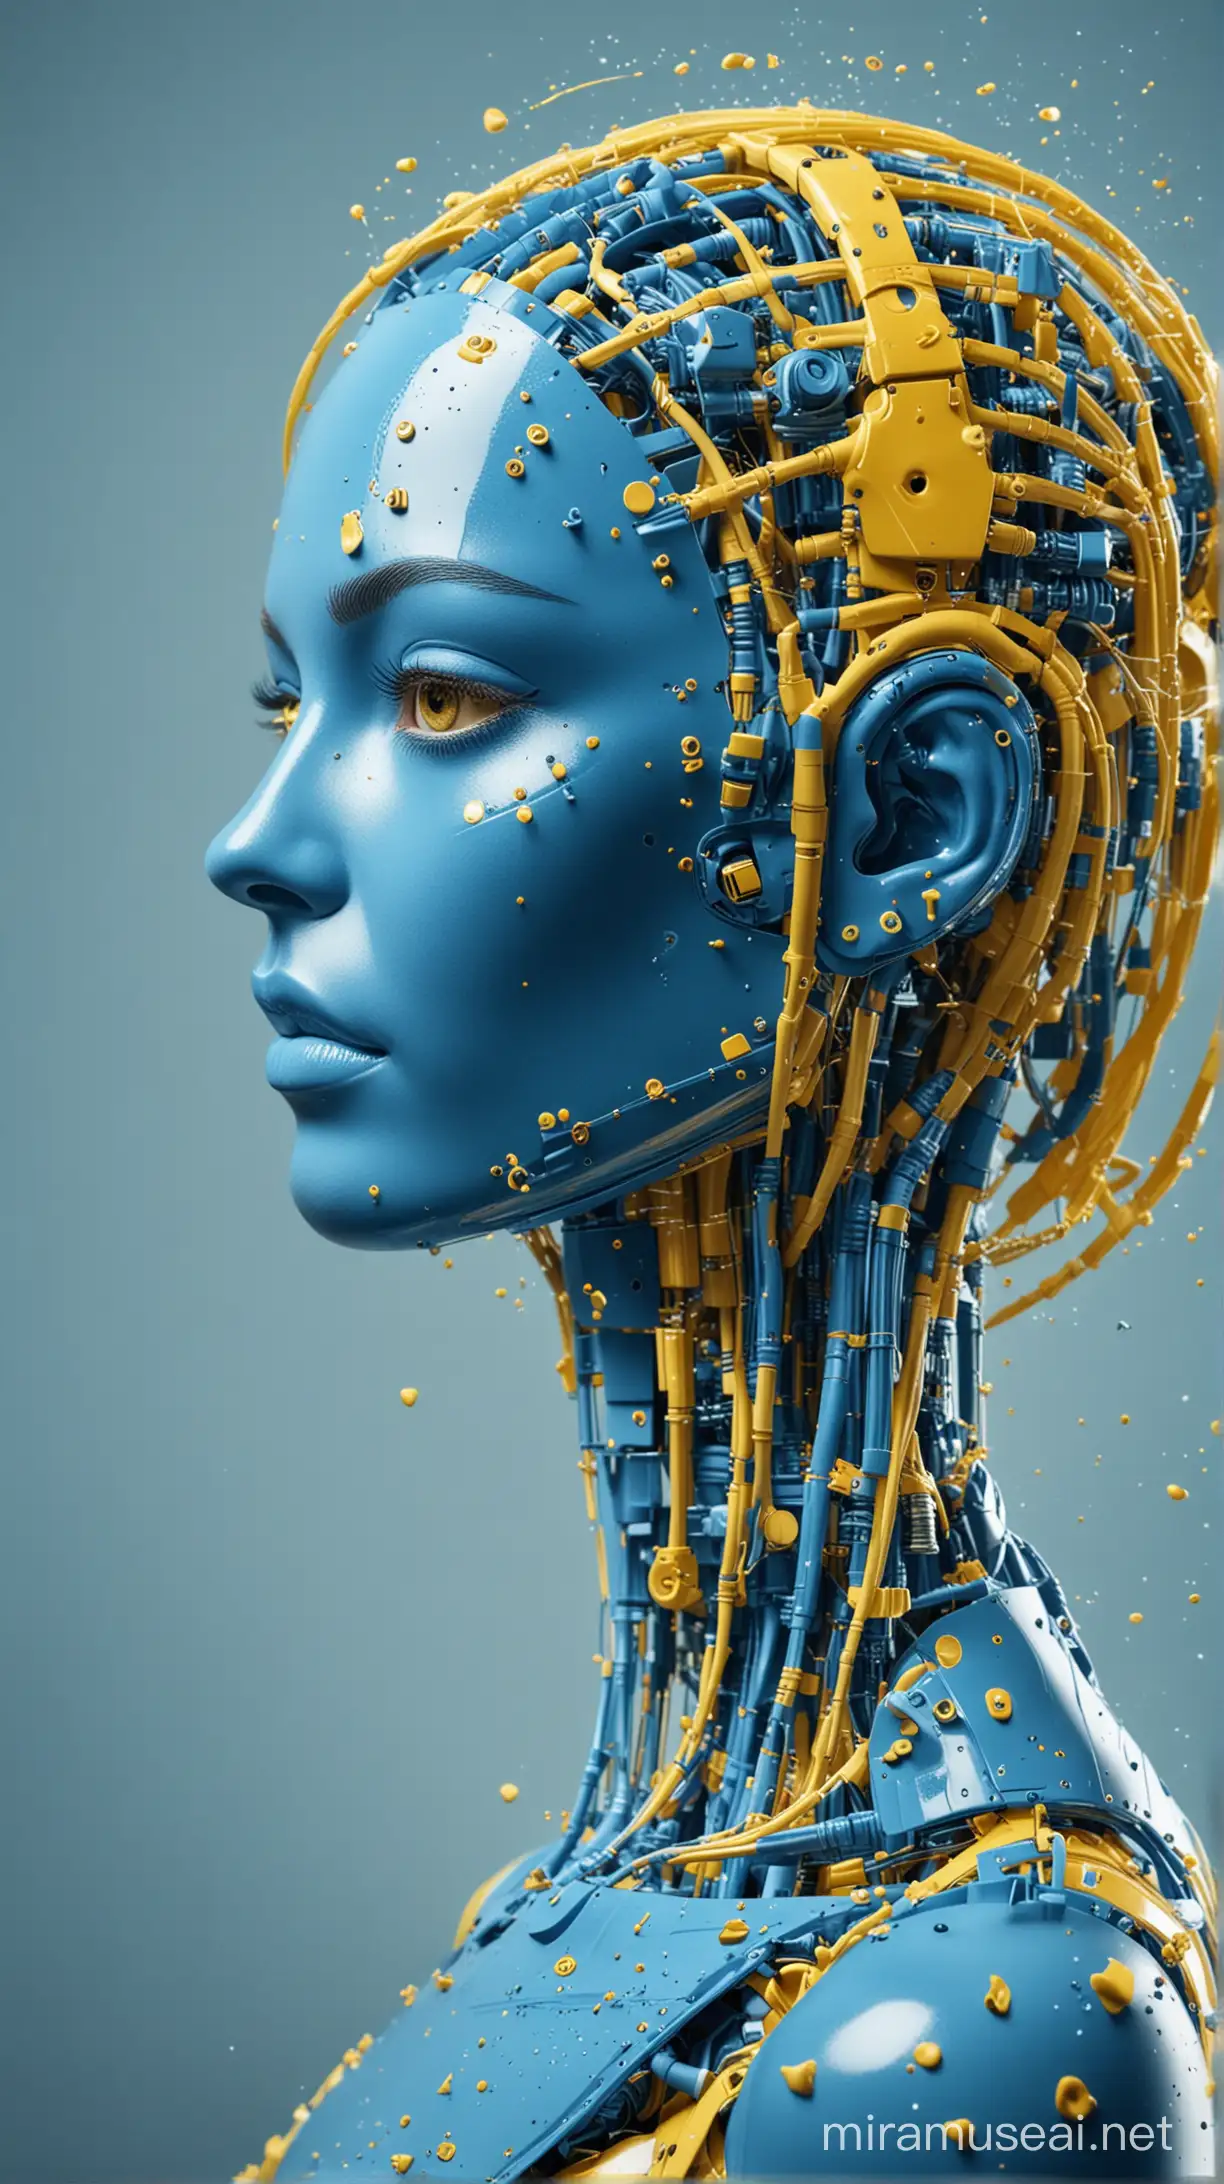 AI and marketing, use blue and yellow colors

